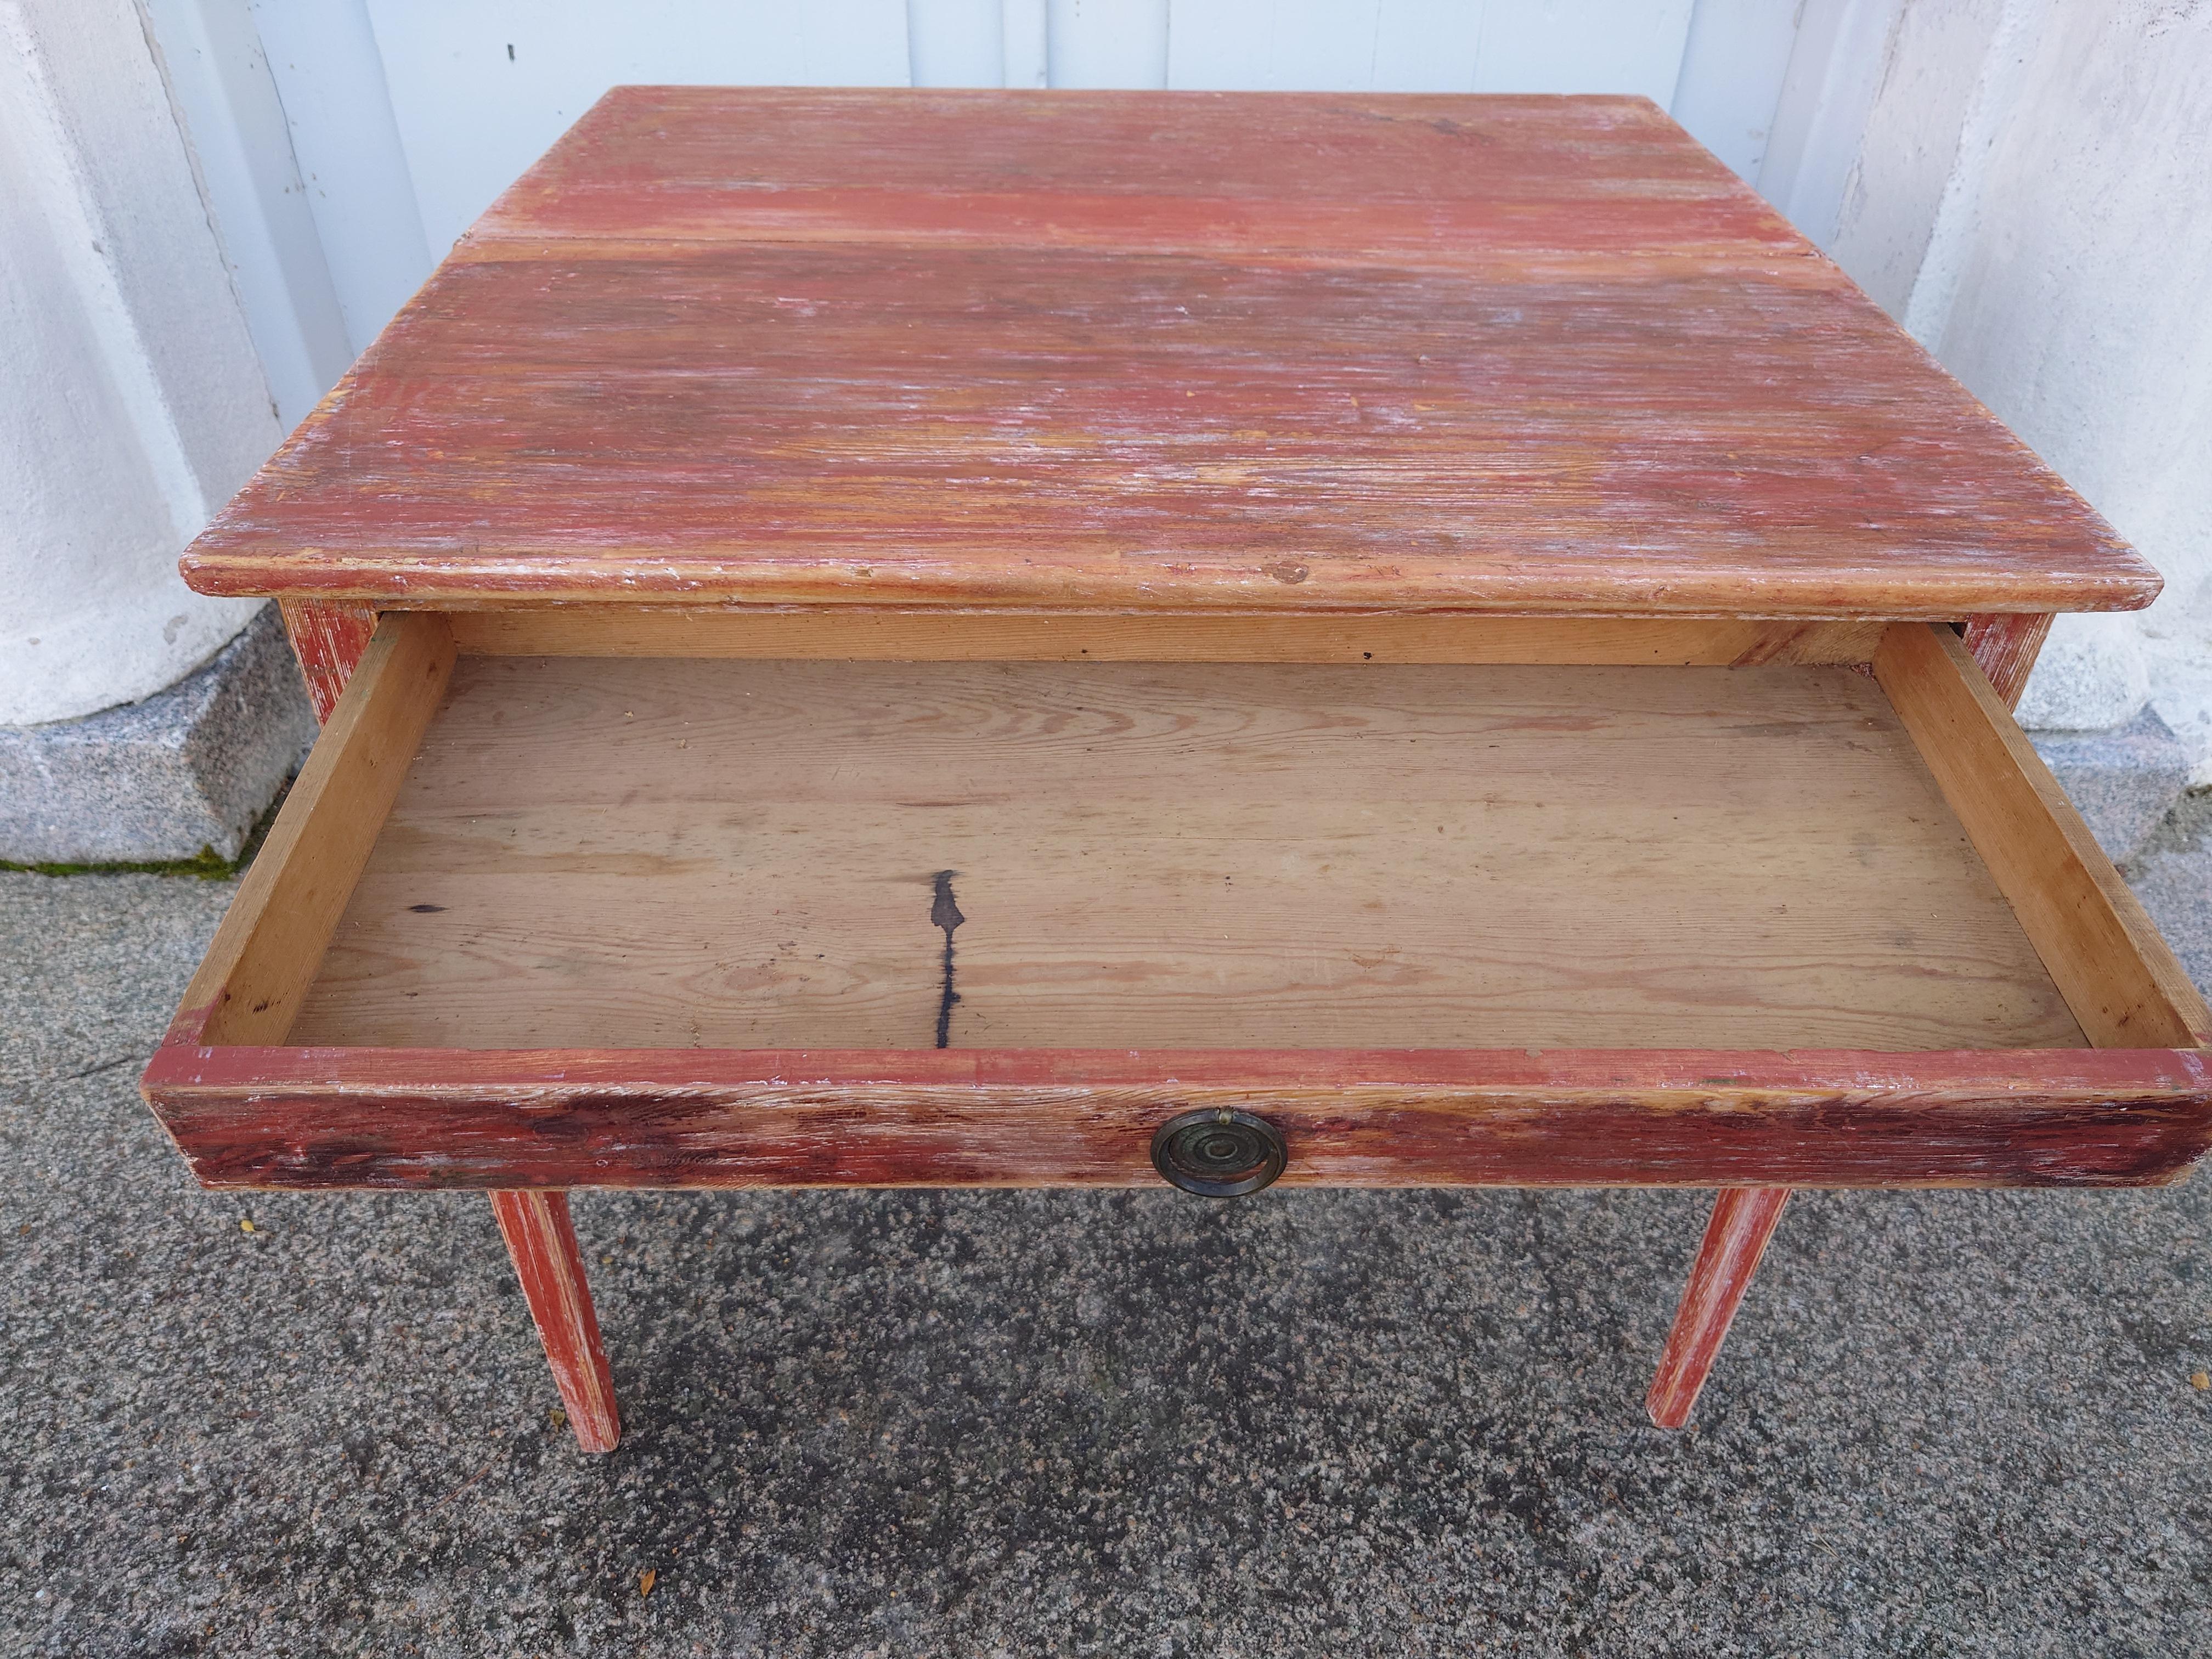  19th Century Swedish antique  rustic genuine Game Table for Playing games   For Sale 10